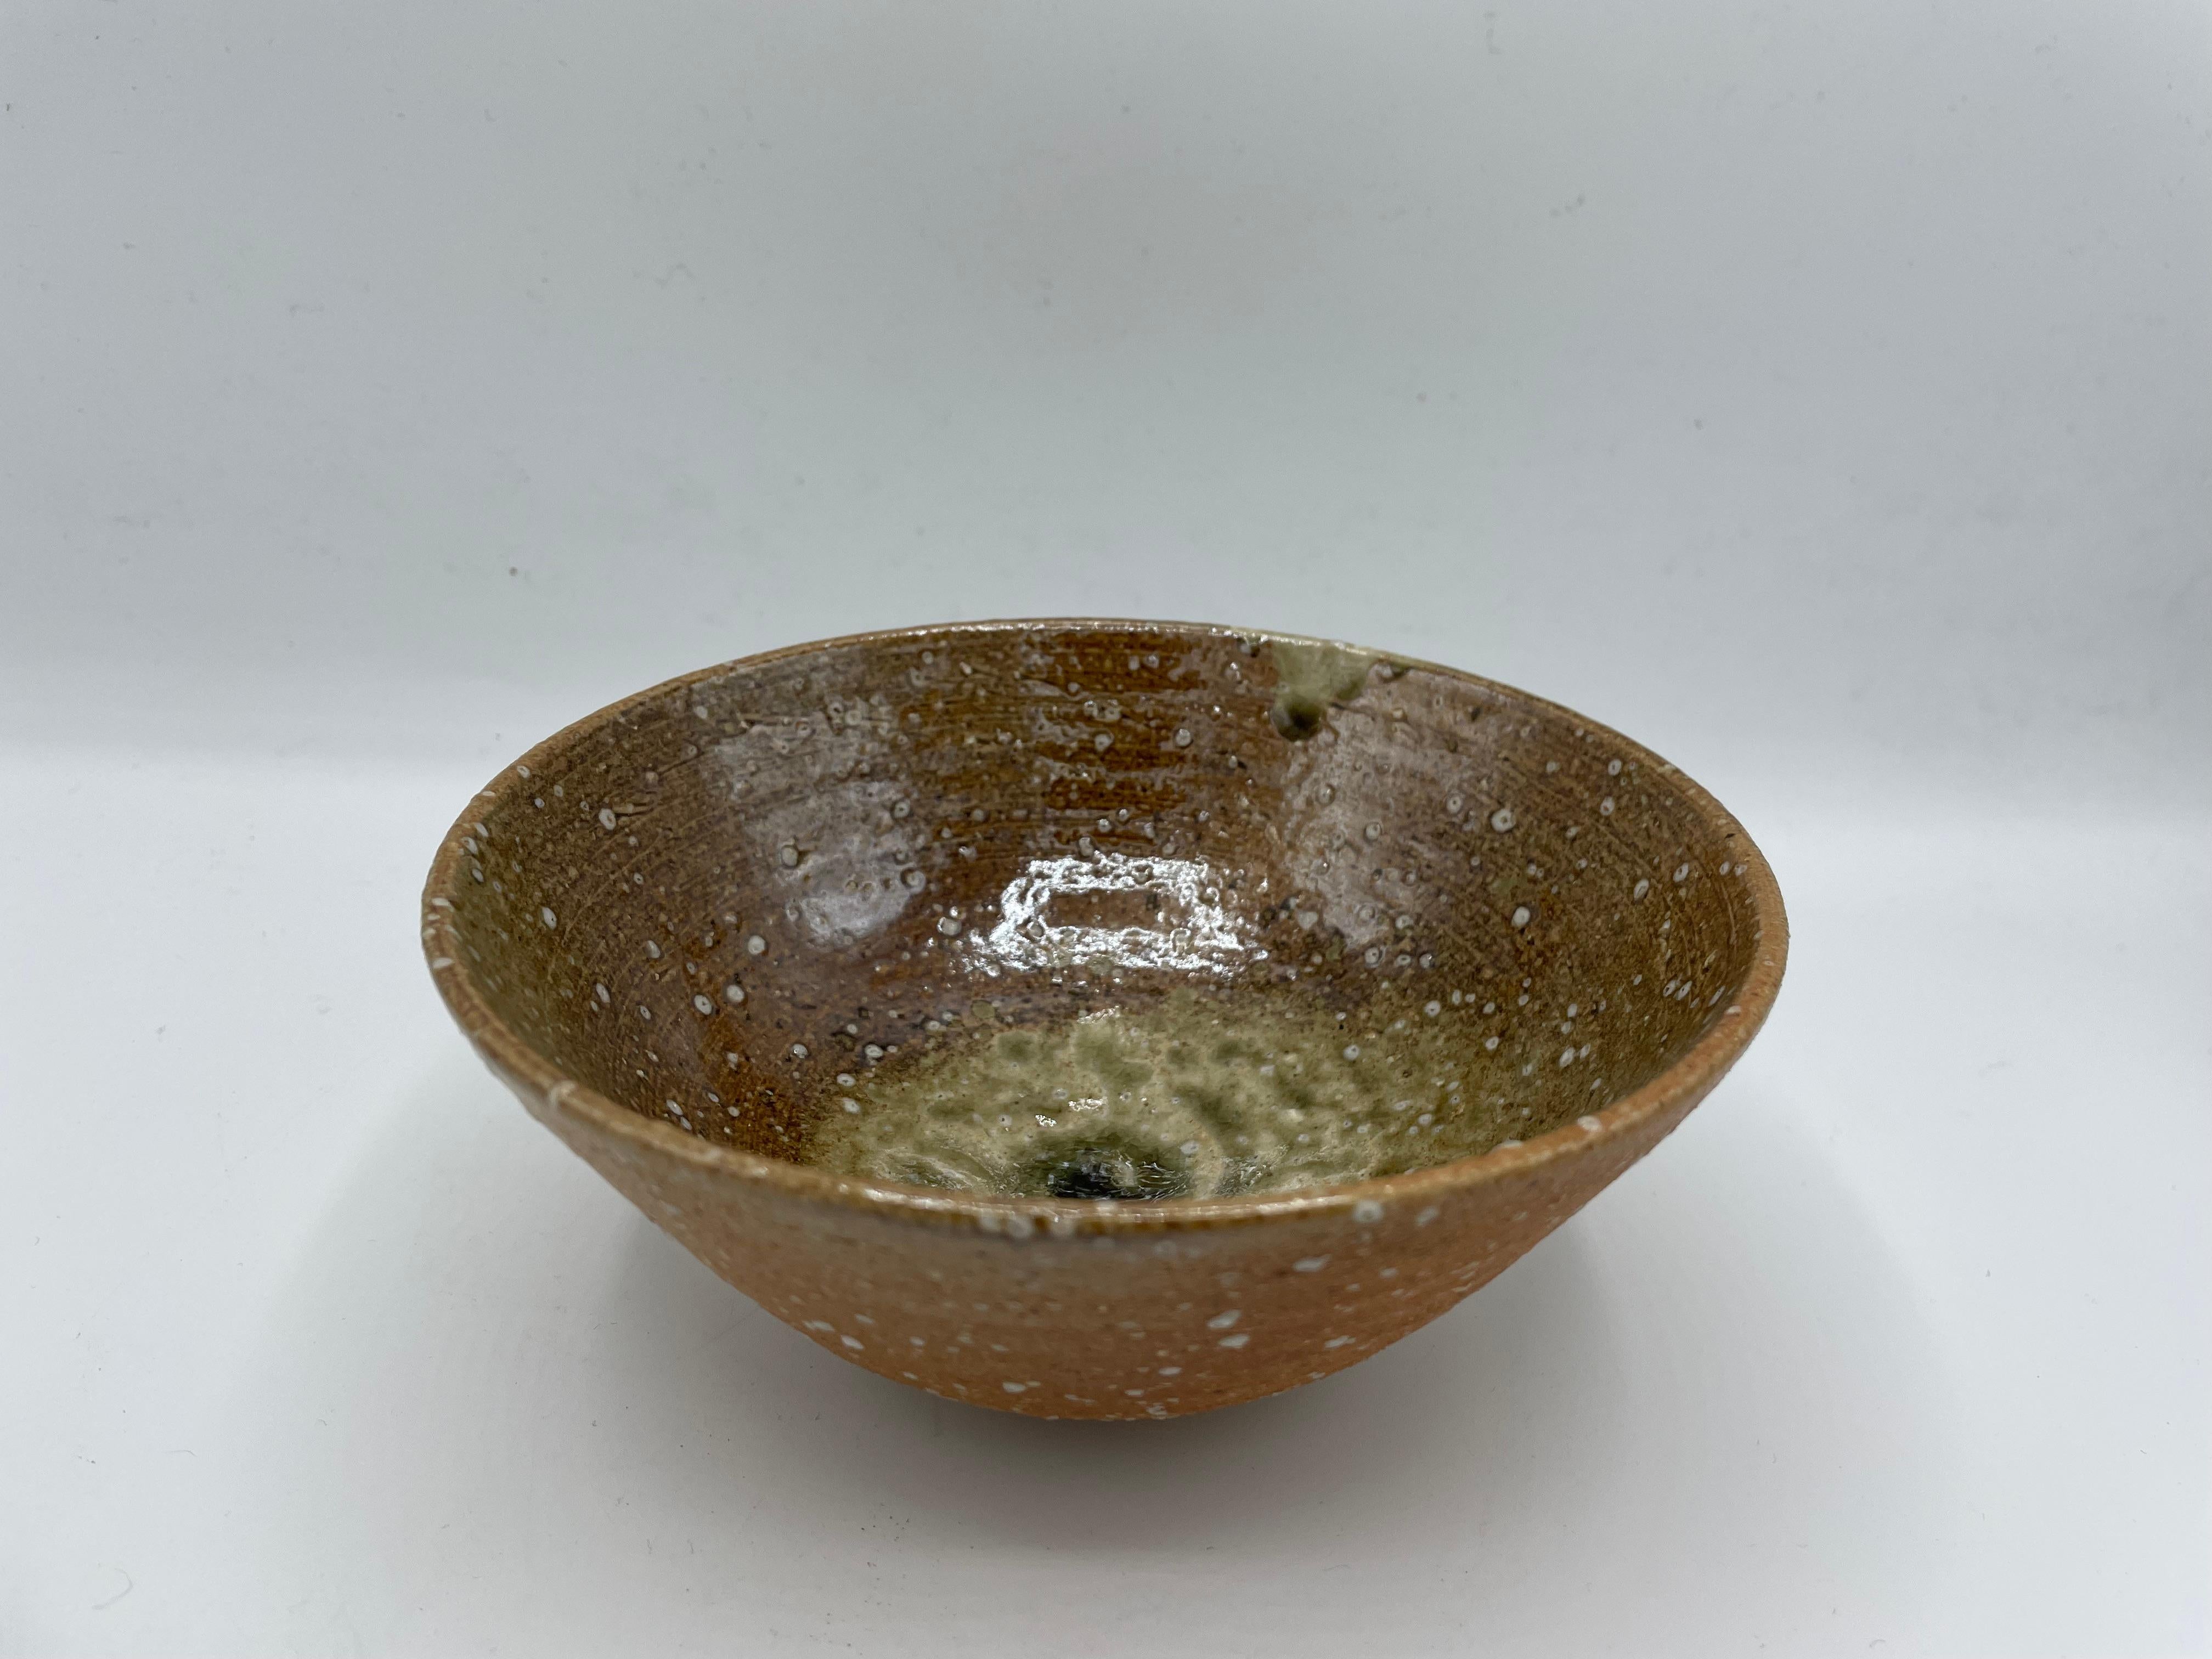 This is a matcha tea bowl which we use for tea ceremony.
This matcha bowl (matchawan in Japanese) was made around 1980s in Showa era.
This is Shigaraki ware and on the bottom of this bowl, it is written 'Rakuhou'.

Dimensions: 14.5 x 14.5 H 6.3